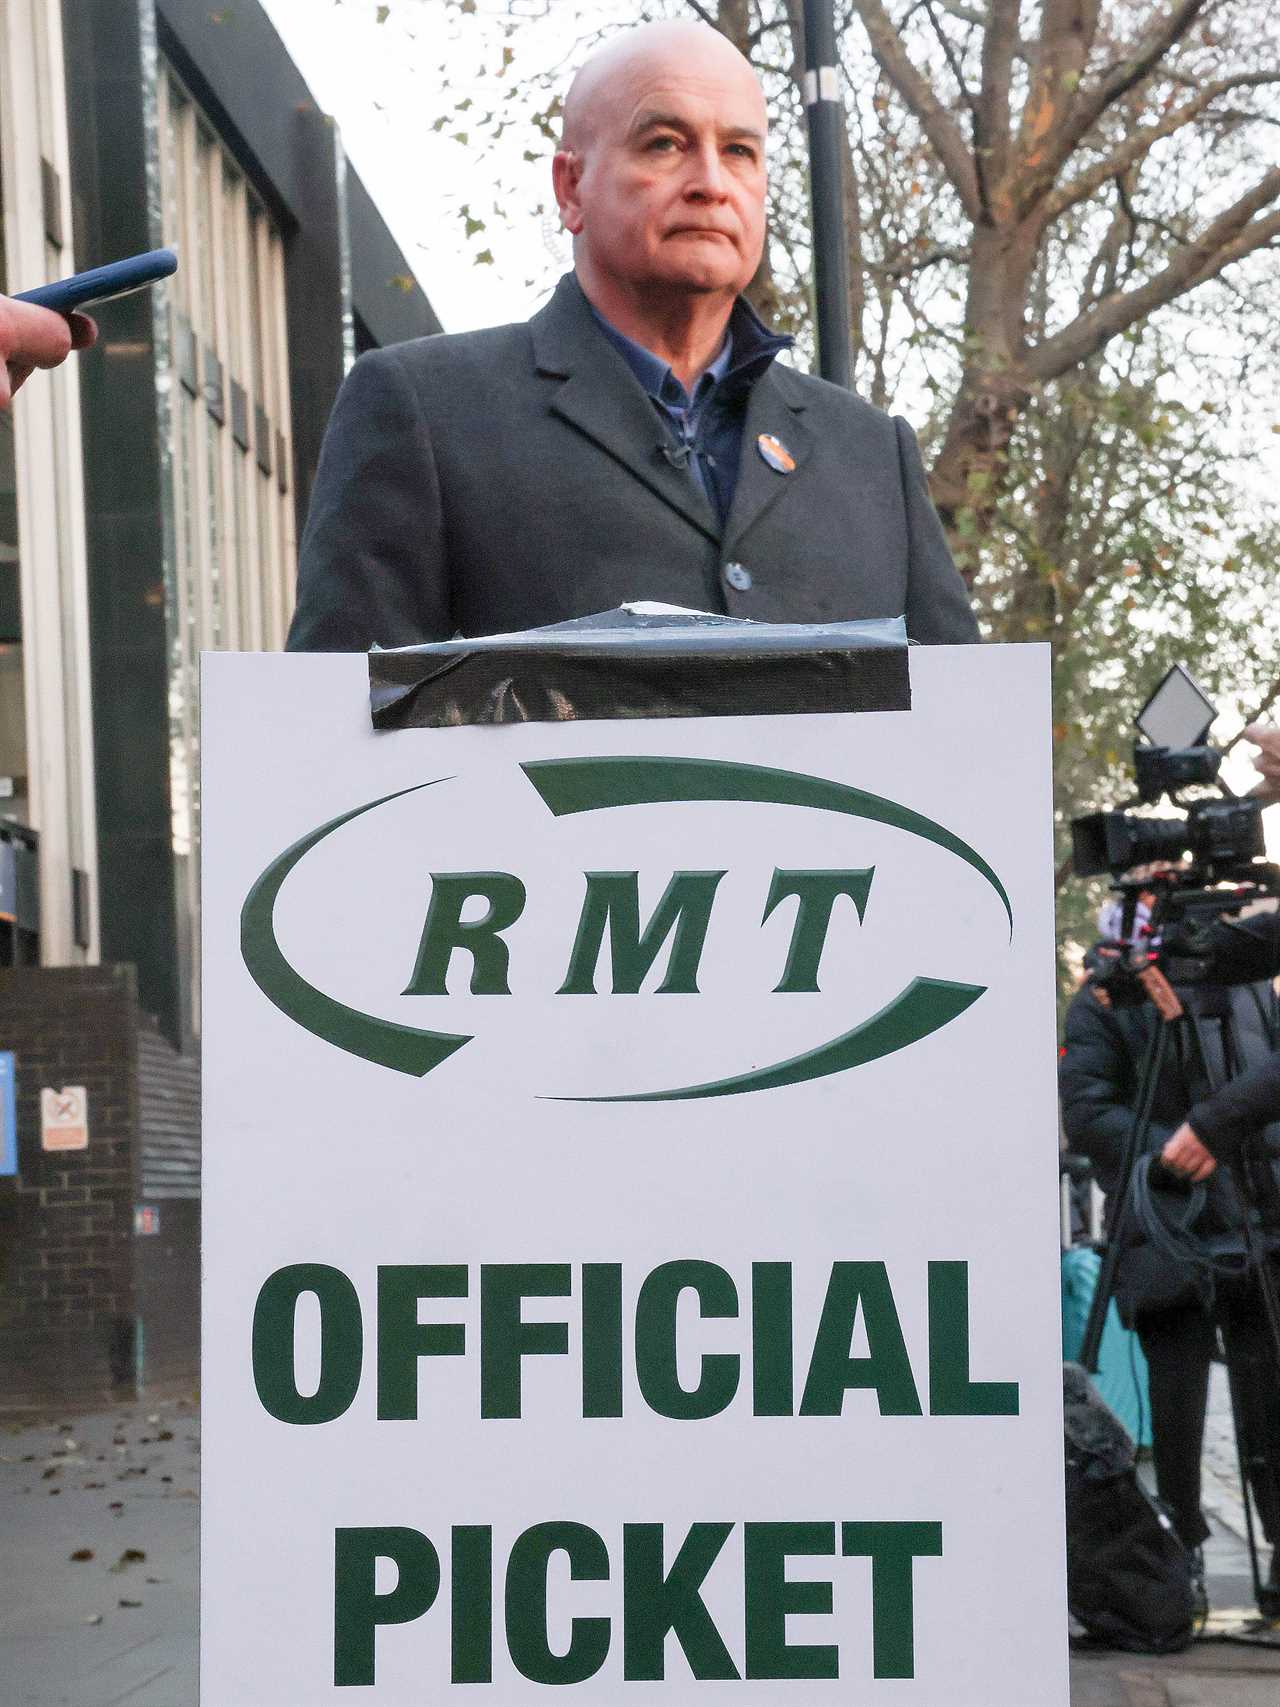 Strike boss Mick Lynch under pressure as it’s revealed 250 signallers & track engineers are paid £100k